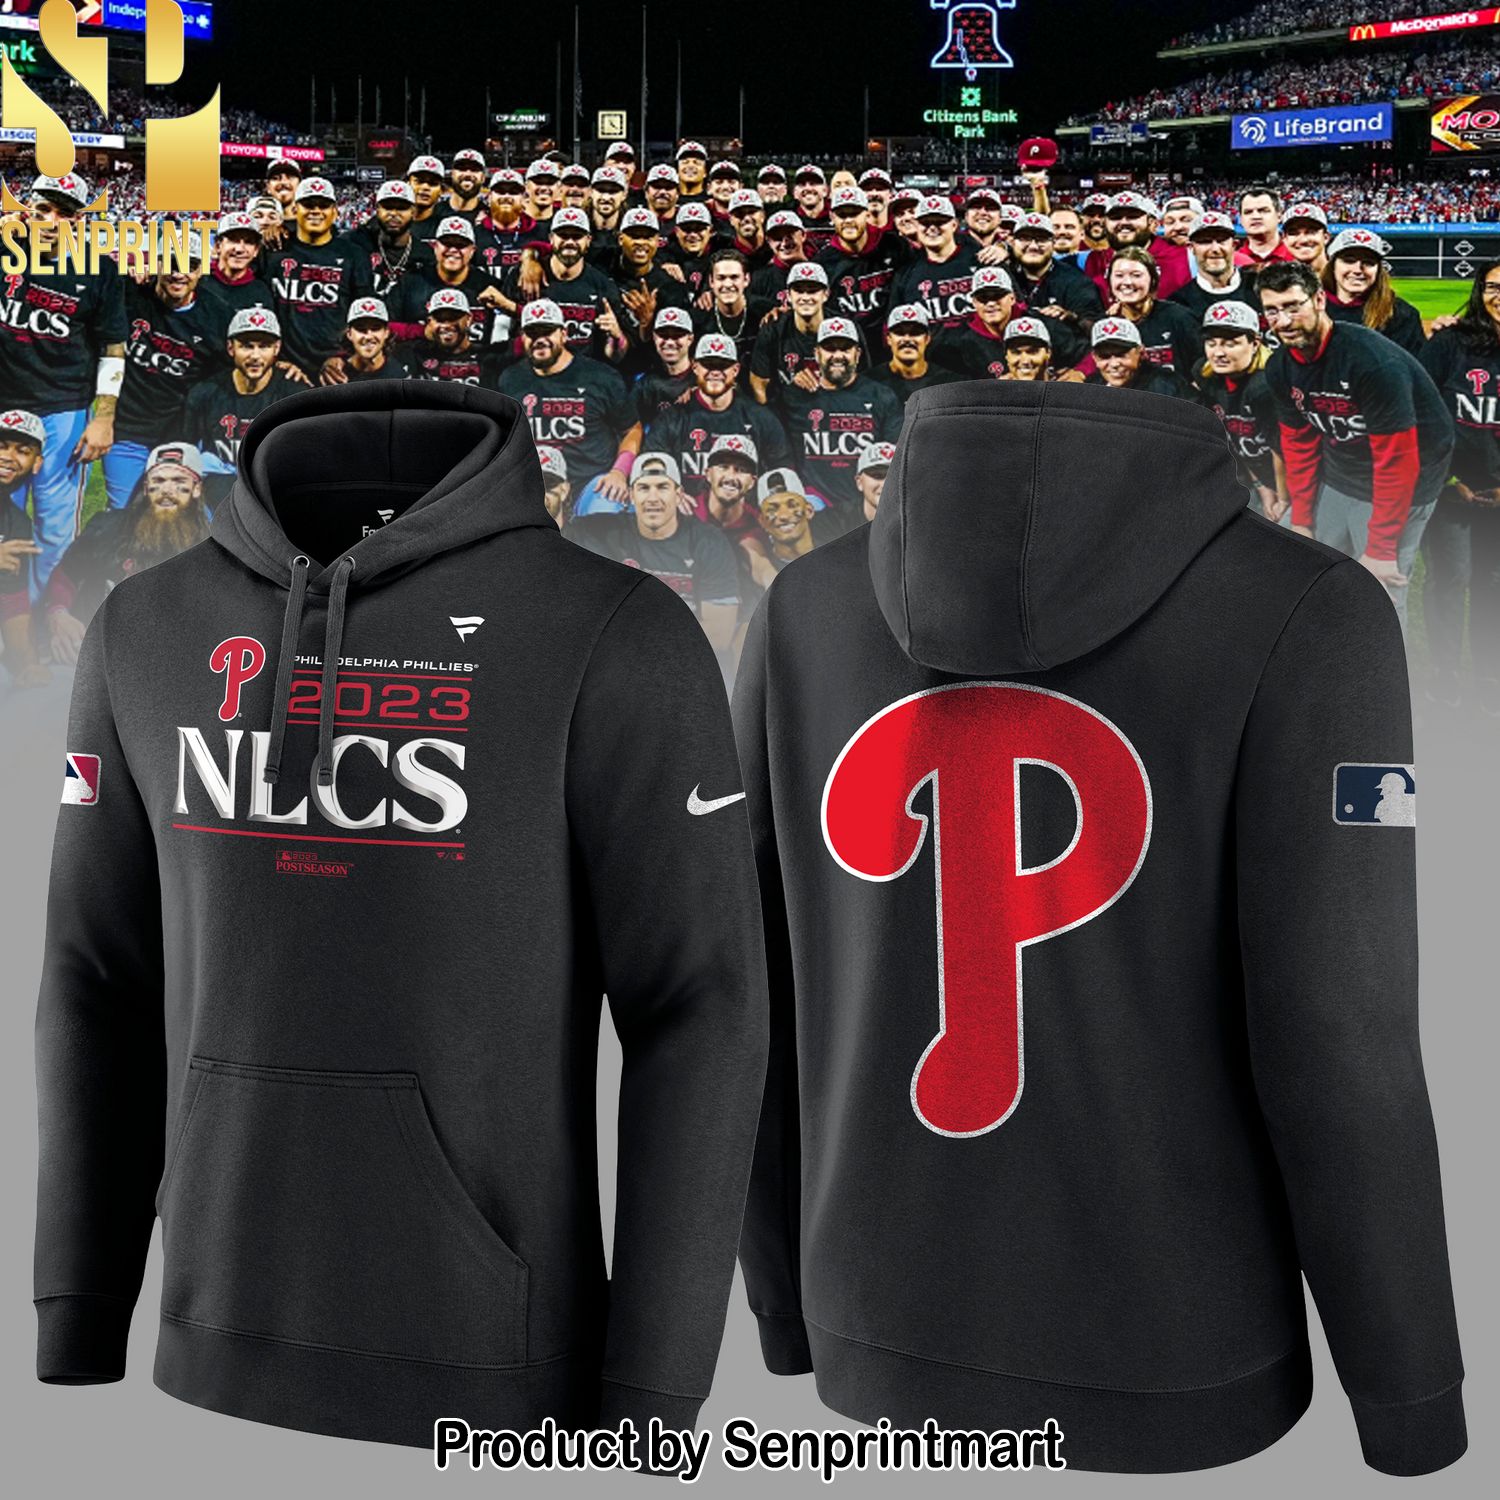 Philadelphia Phillies 2023 NLCS Awesome Outfit Shirt